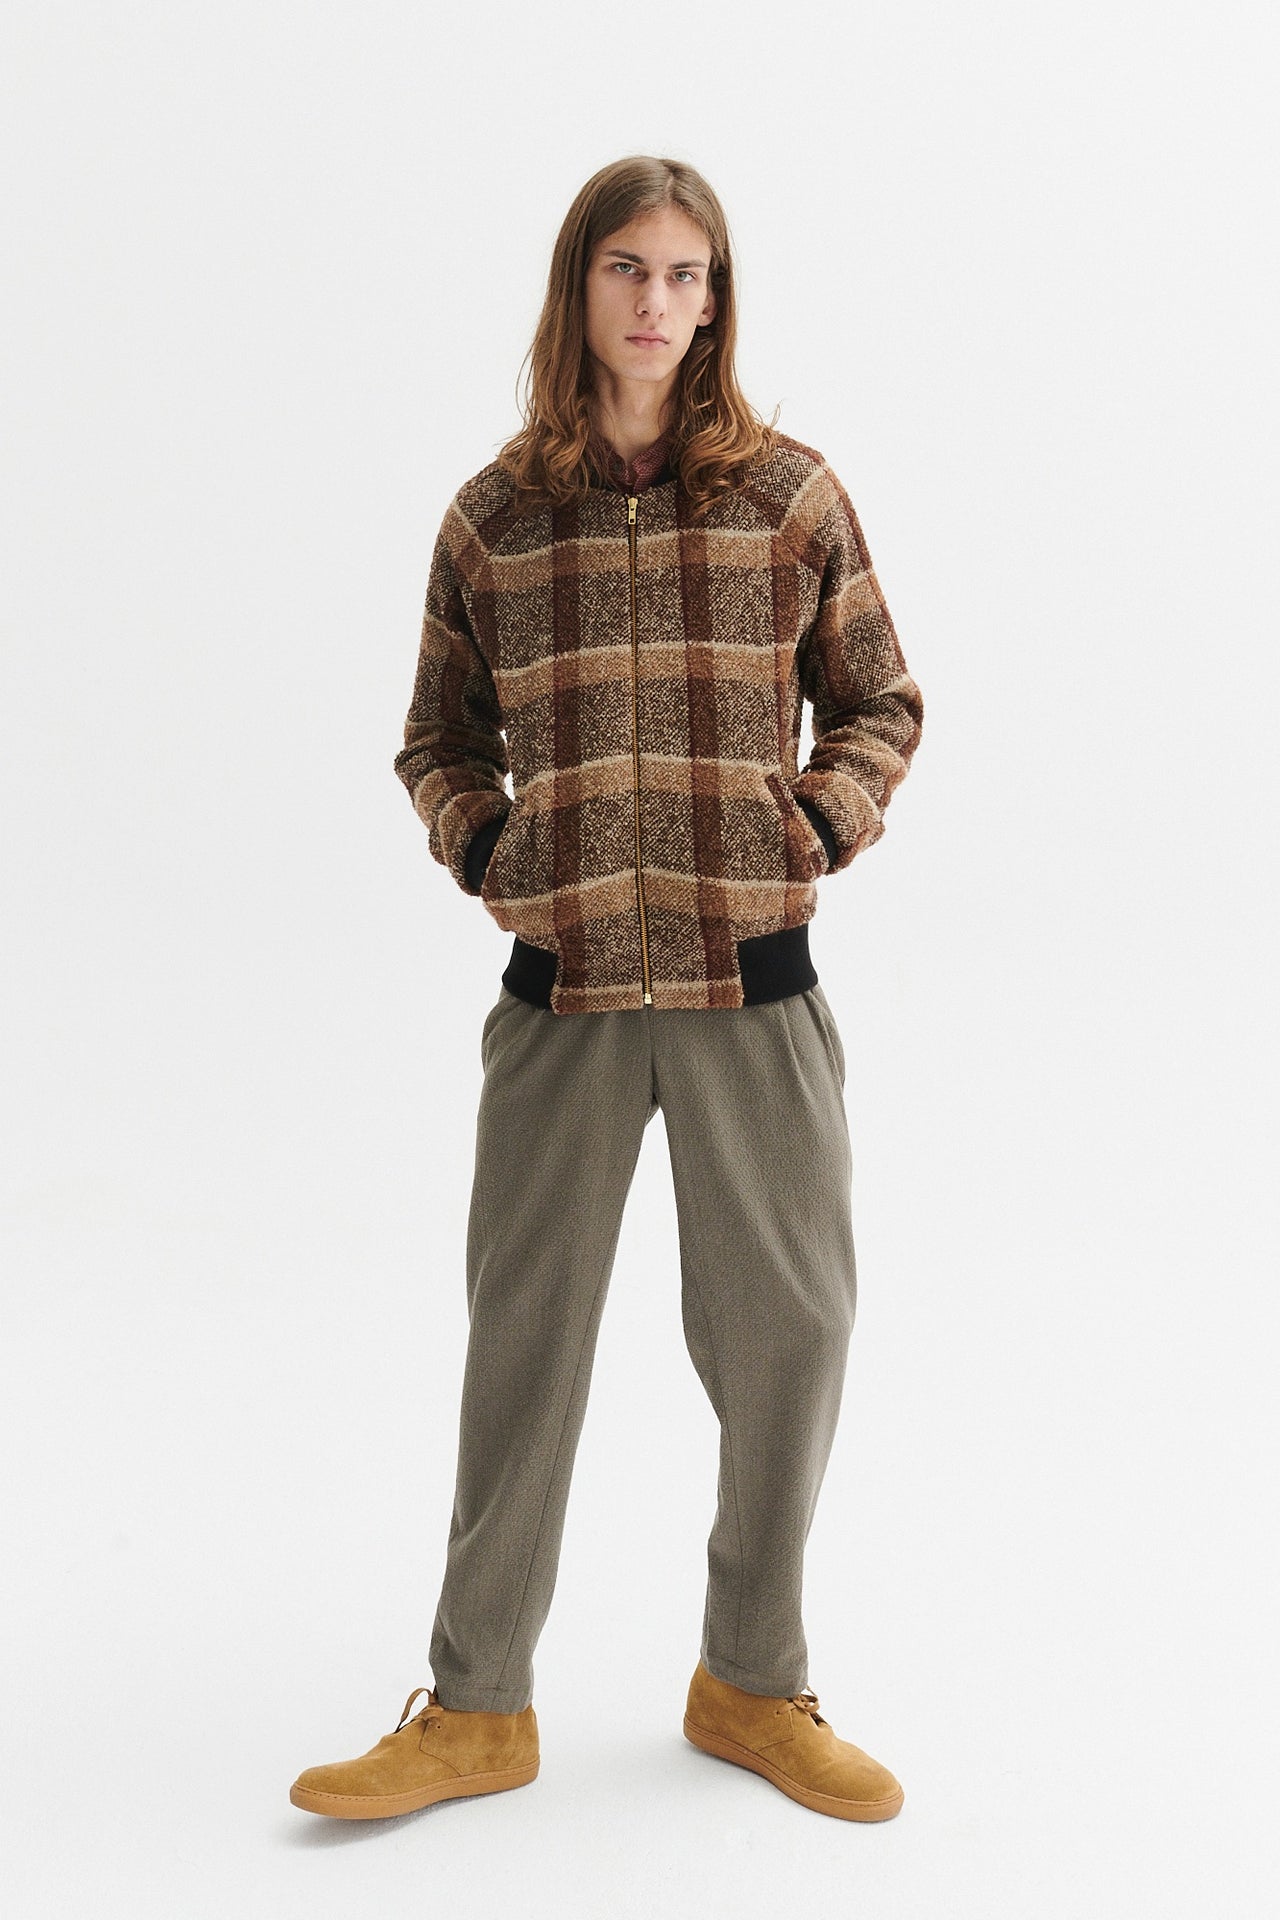 Bomber Jacket in a Soft Brown Check Italian Wool from Lanificio Subalpino